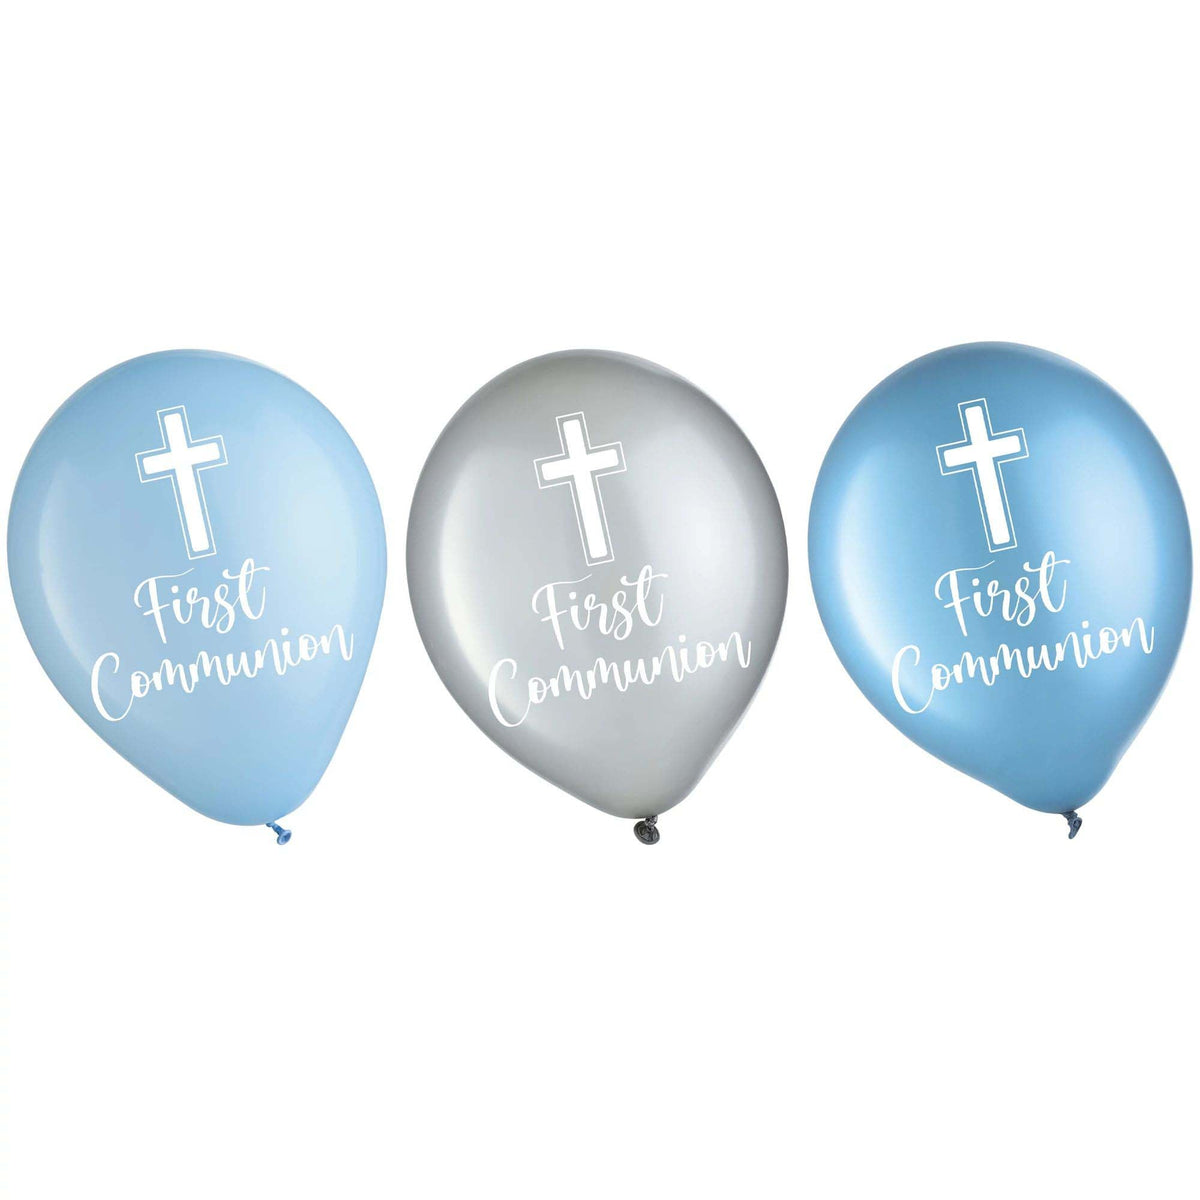 AMSCAN CA Religious Blue Communion Printed Latex Balloons, Blue and Grey, 12 Inches, 15 Count 192937457528